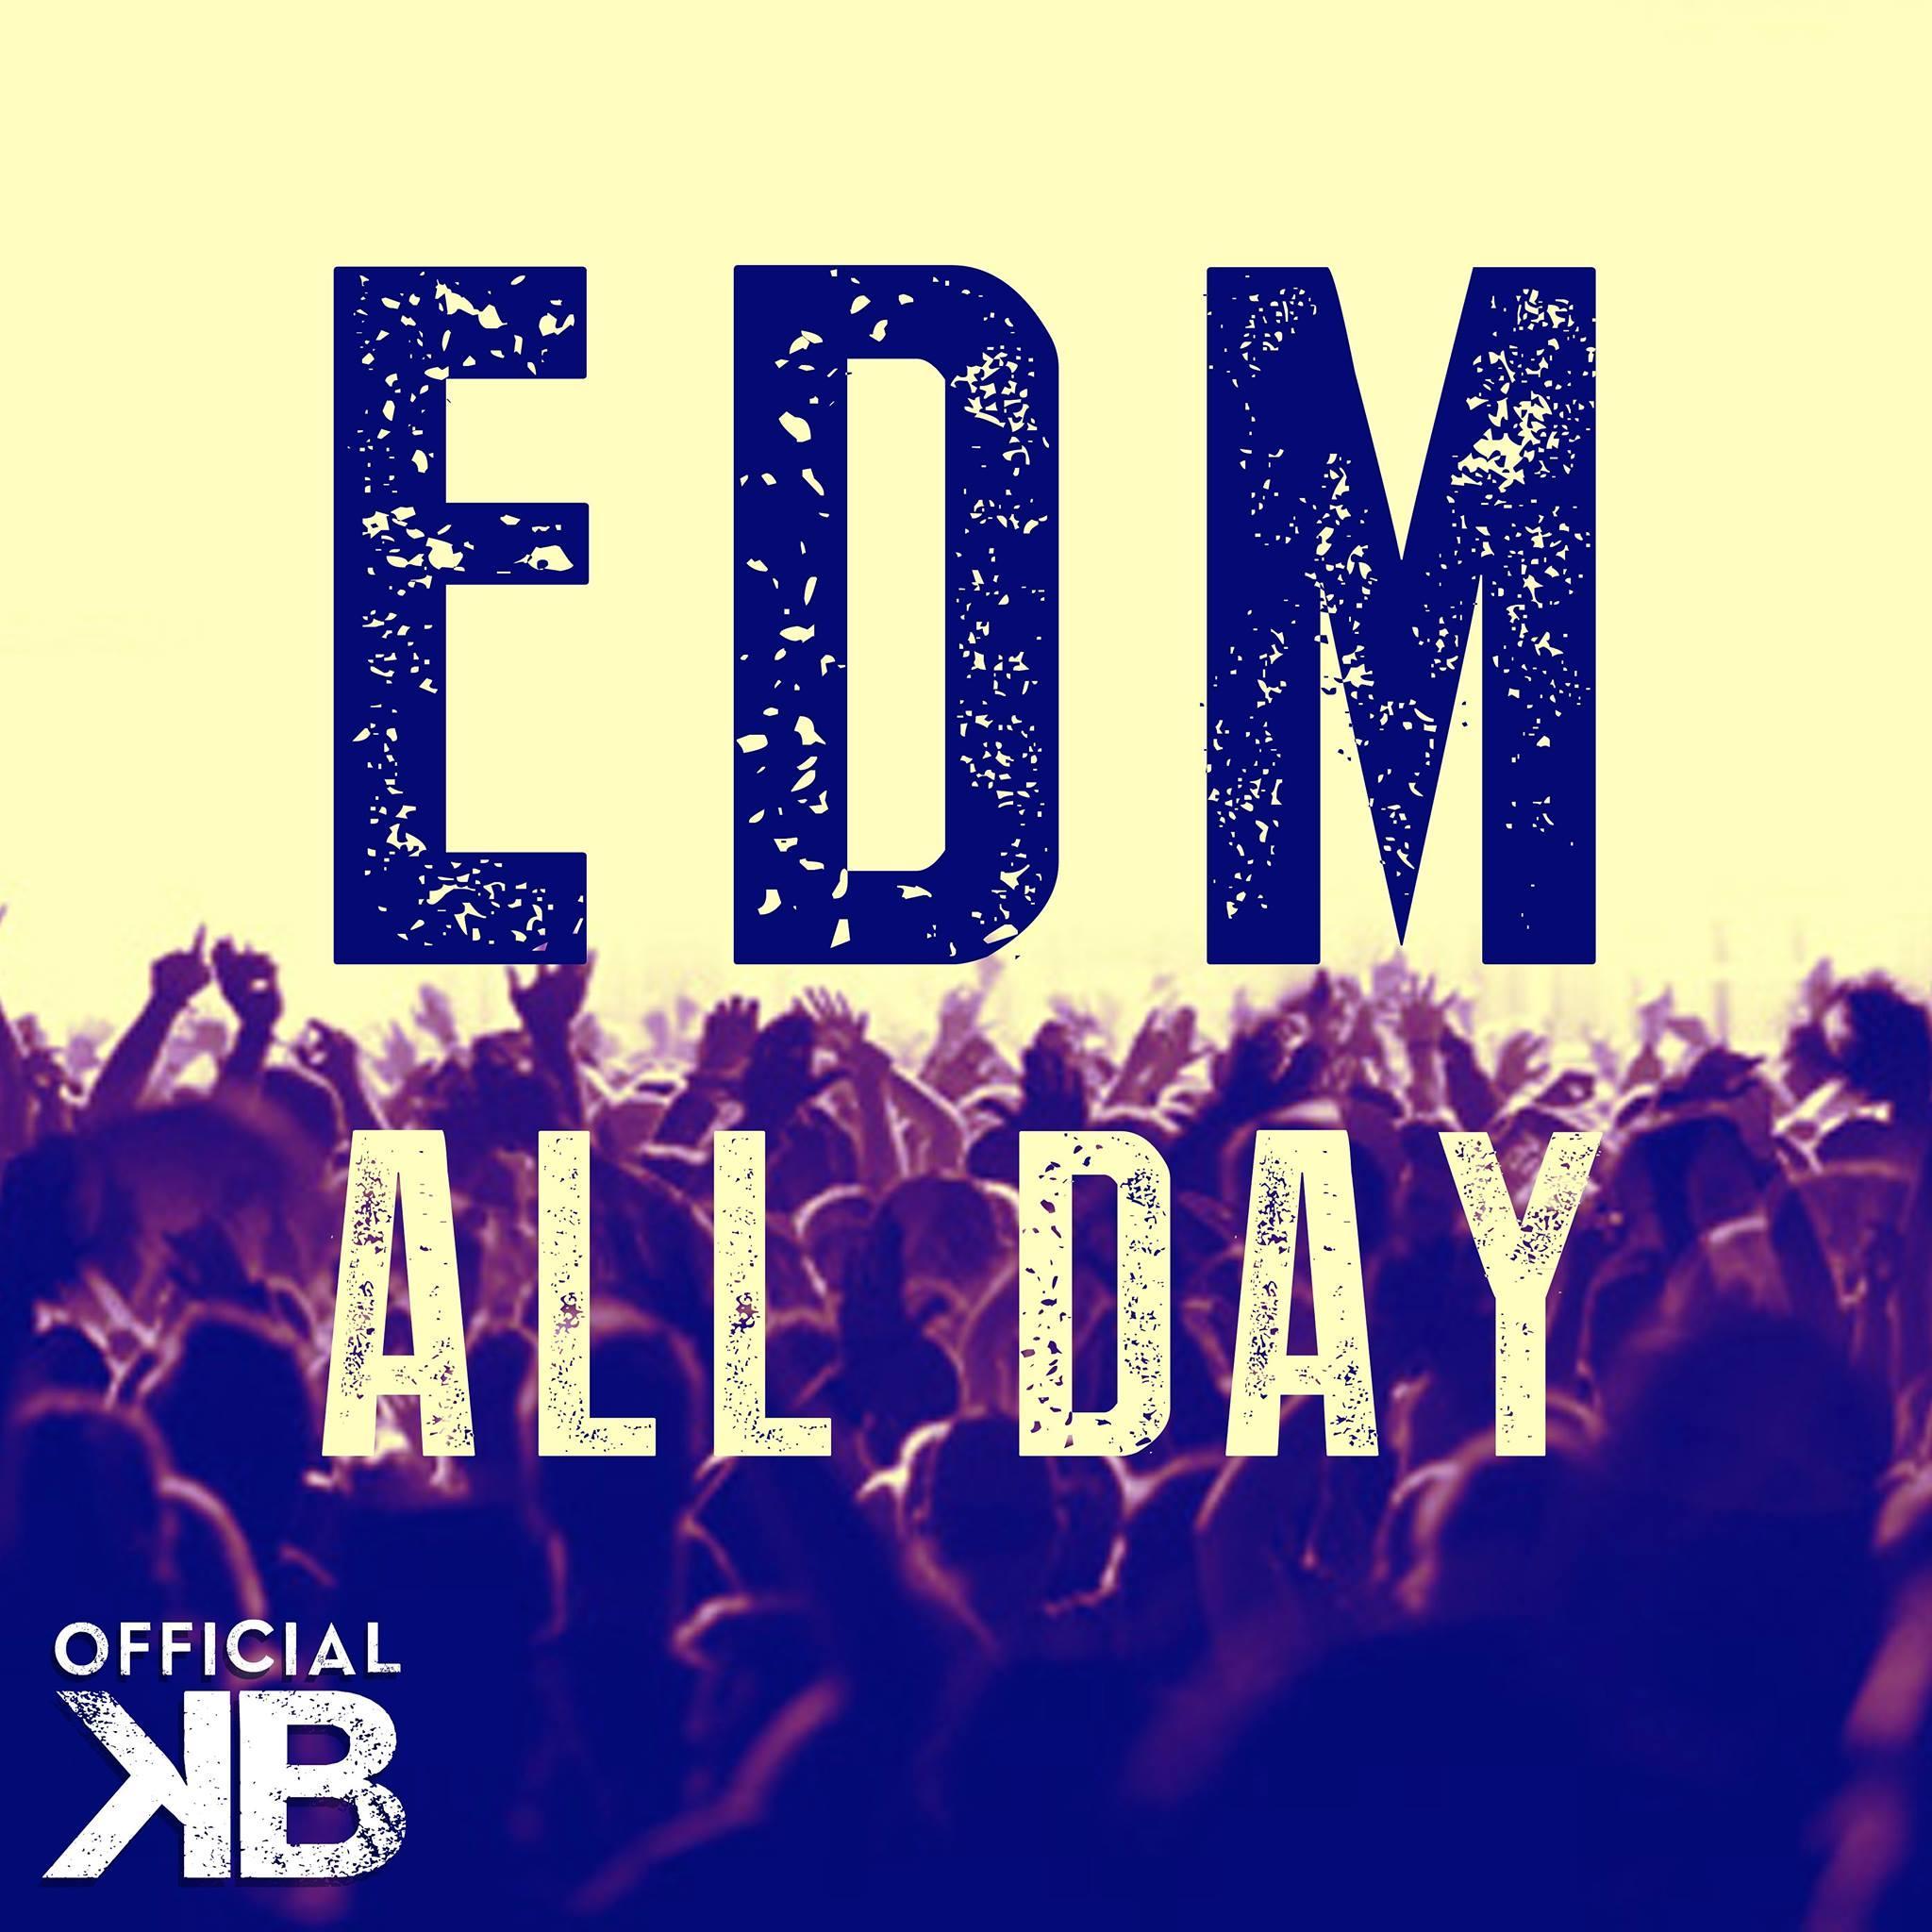 2048x2048 > EDM Wallpapers